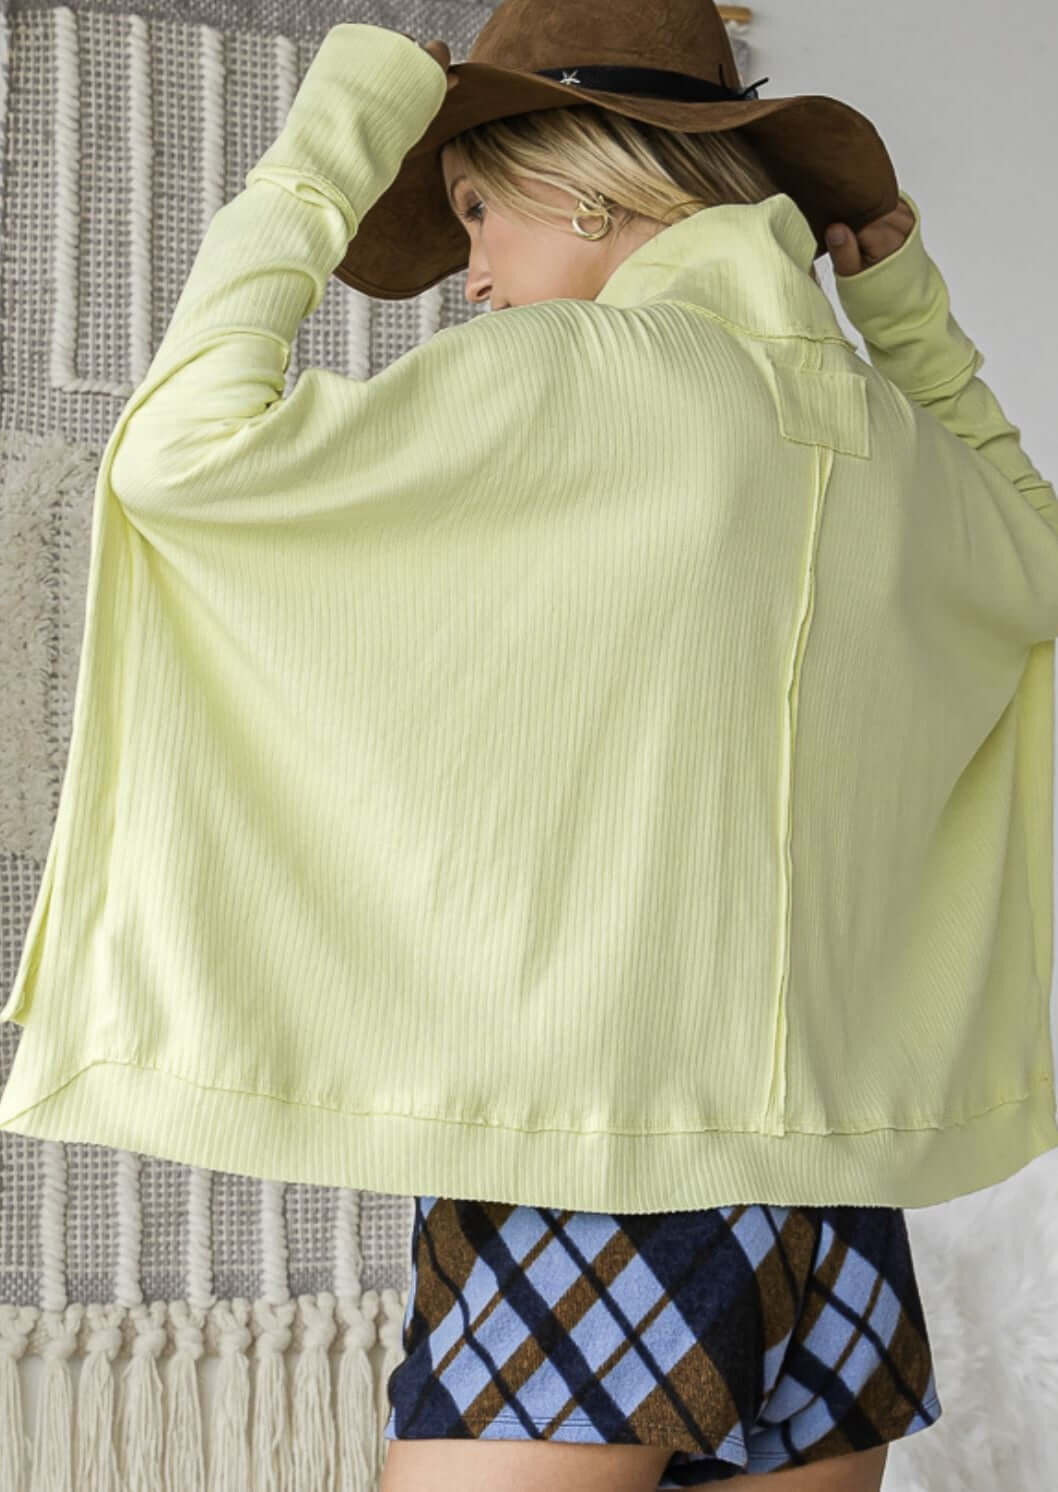 Bucket List Style# T1591 | Ladies Soft & Comfortable Mock Turtle Neck Dolman Sleeve Top in Lime Green | Made in USA | Classy Cozy Cool Women's Made in America Boutique